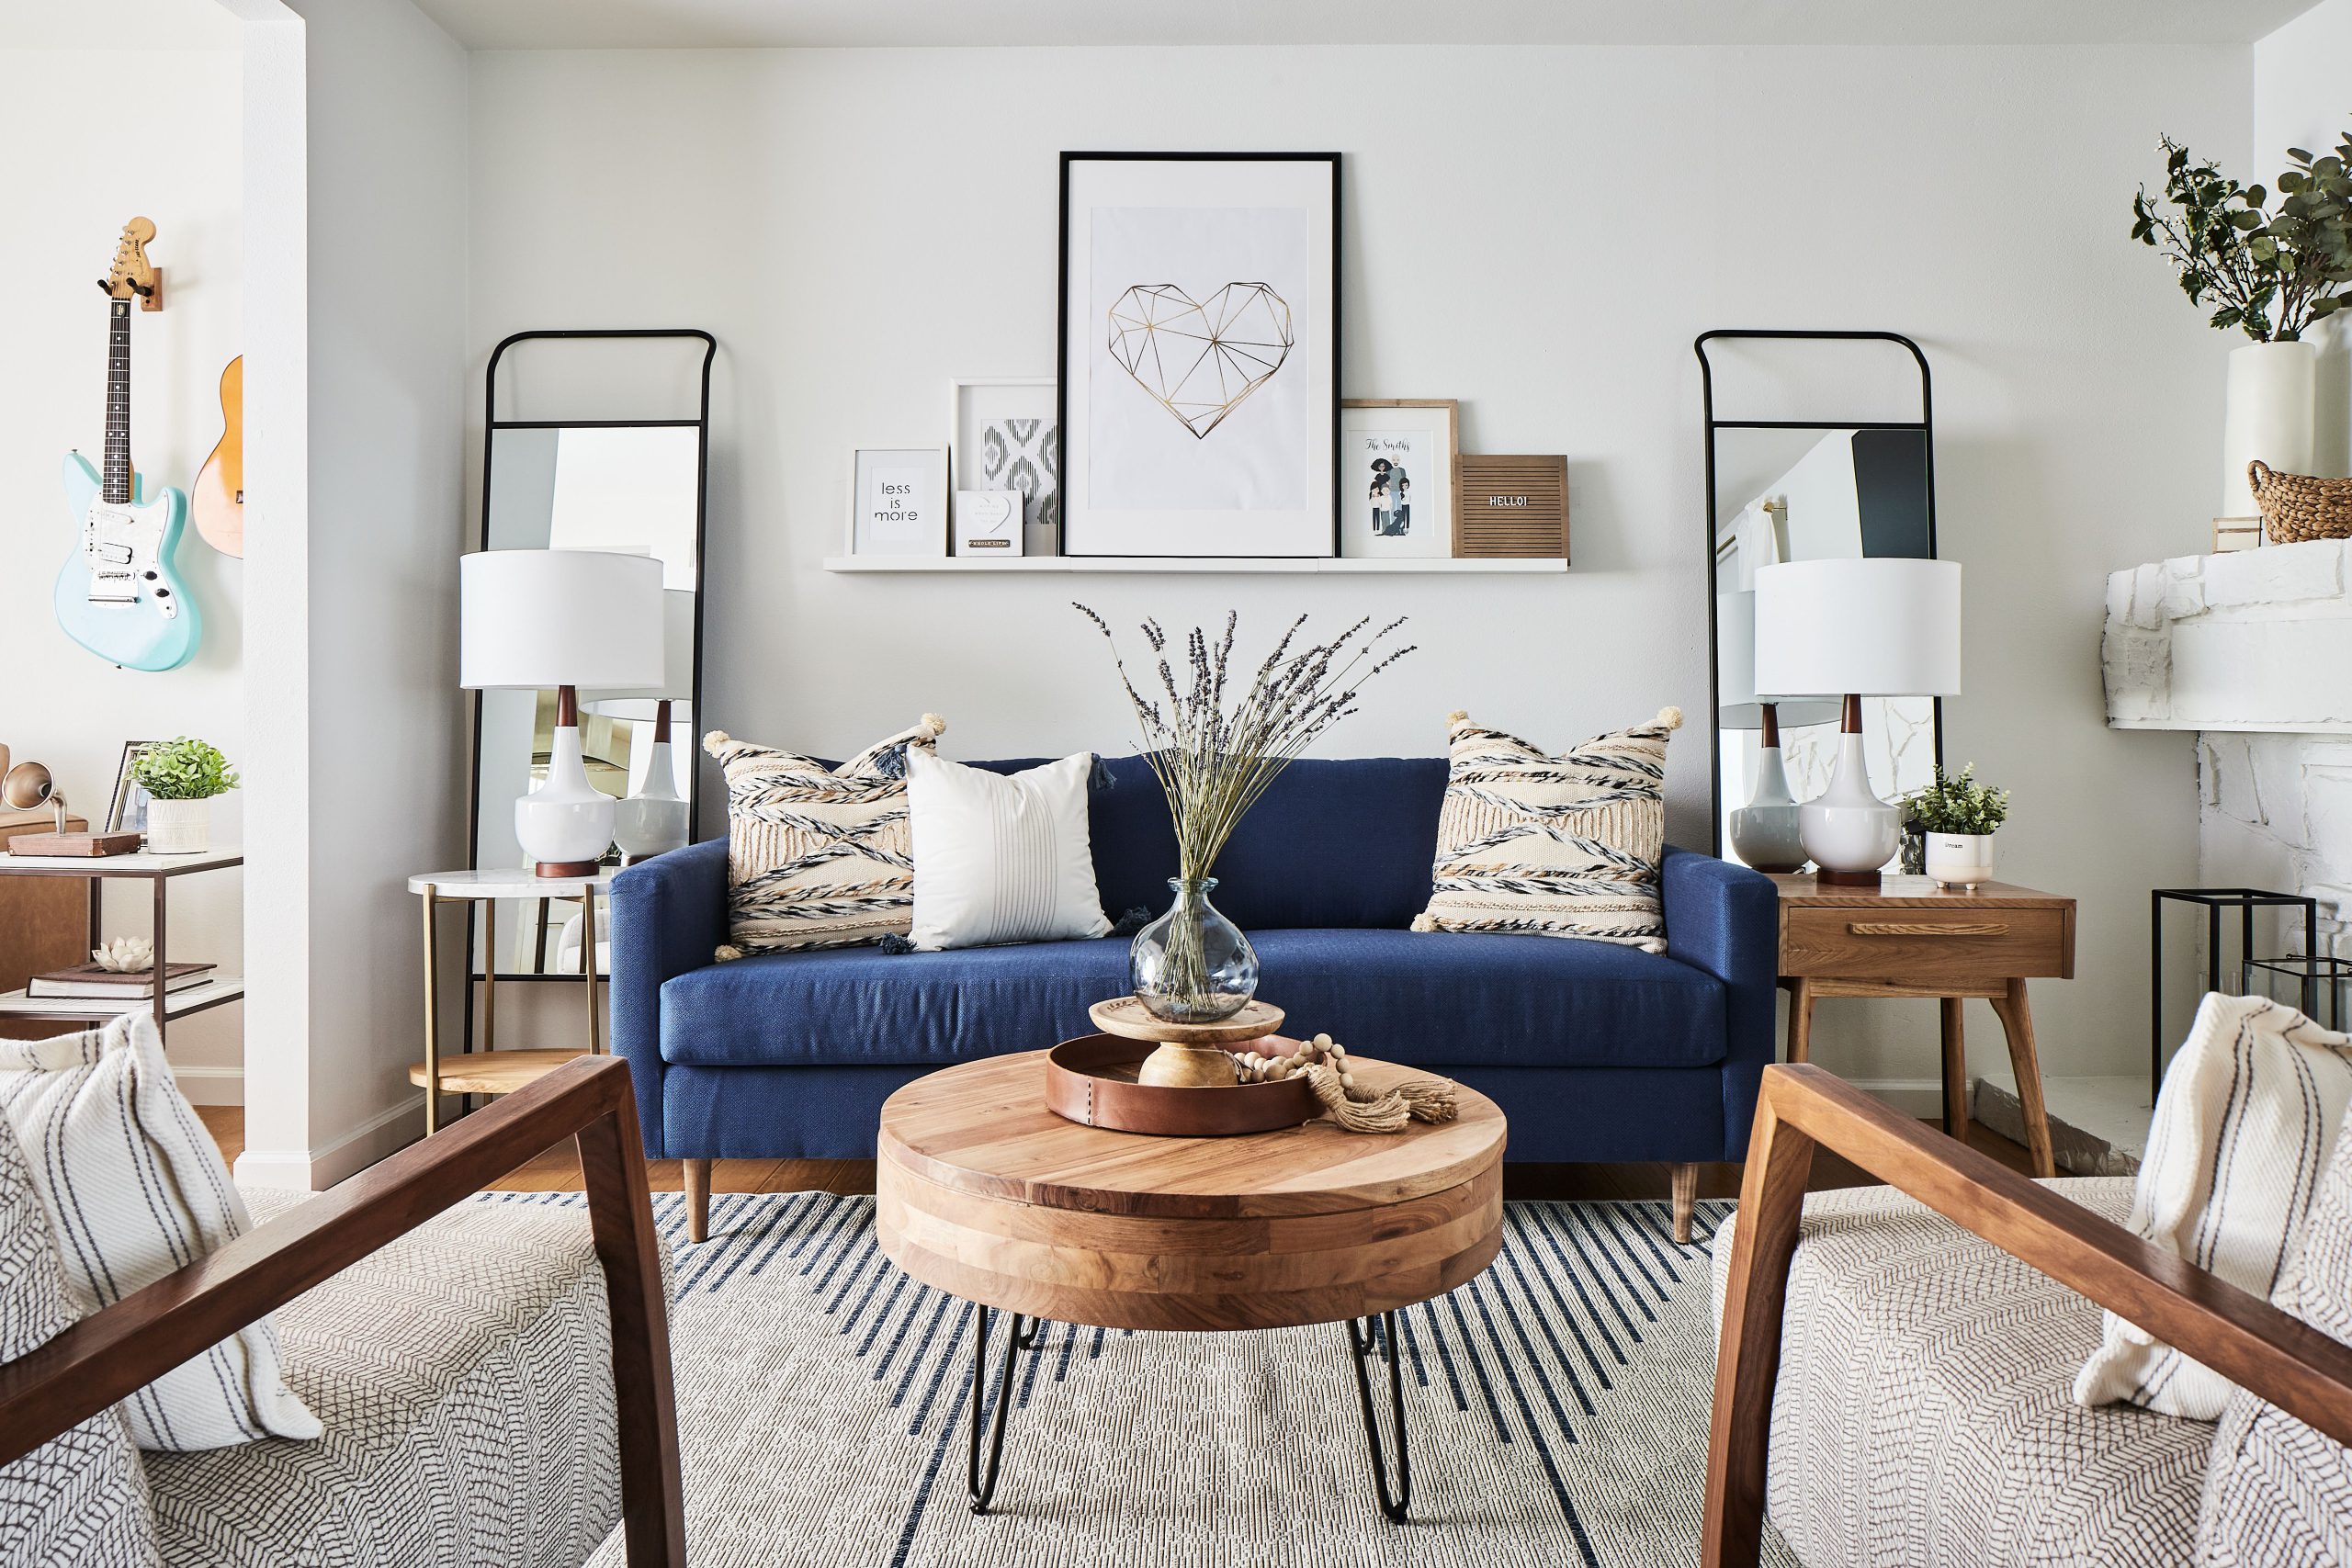 Navy Sofa Looks Catchy to Pair with Mid Century Chairs